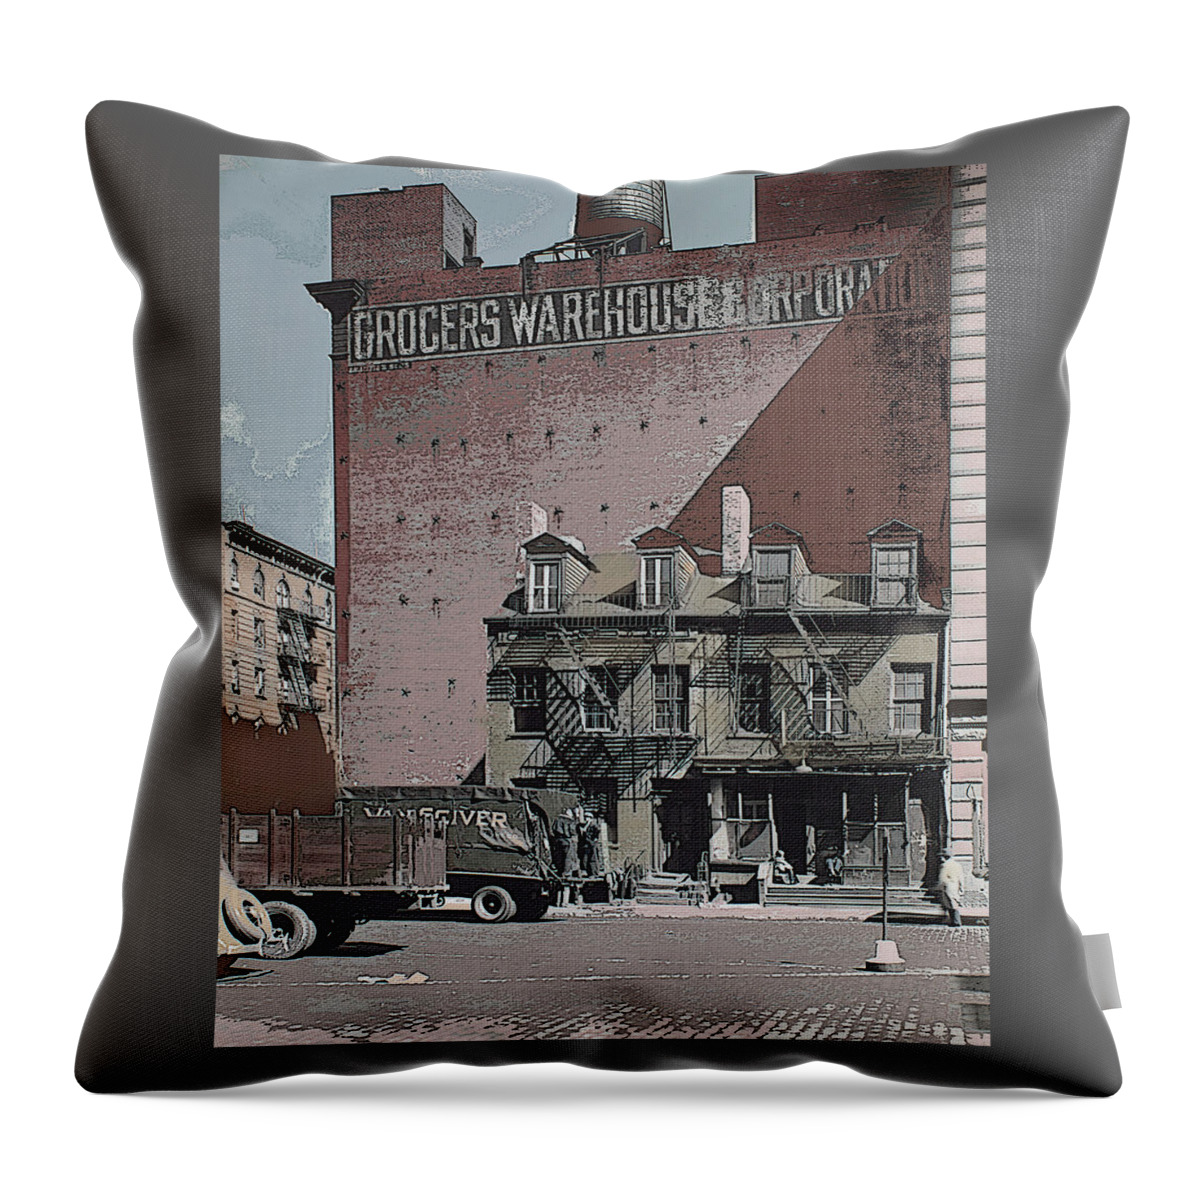 Vintage Throw Pillow featuring the mixed media 1930's America Warehouse District Colorized Photograph by Shelli Fitzpatrick